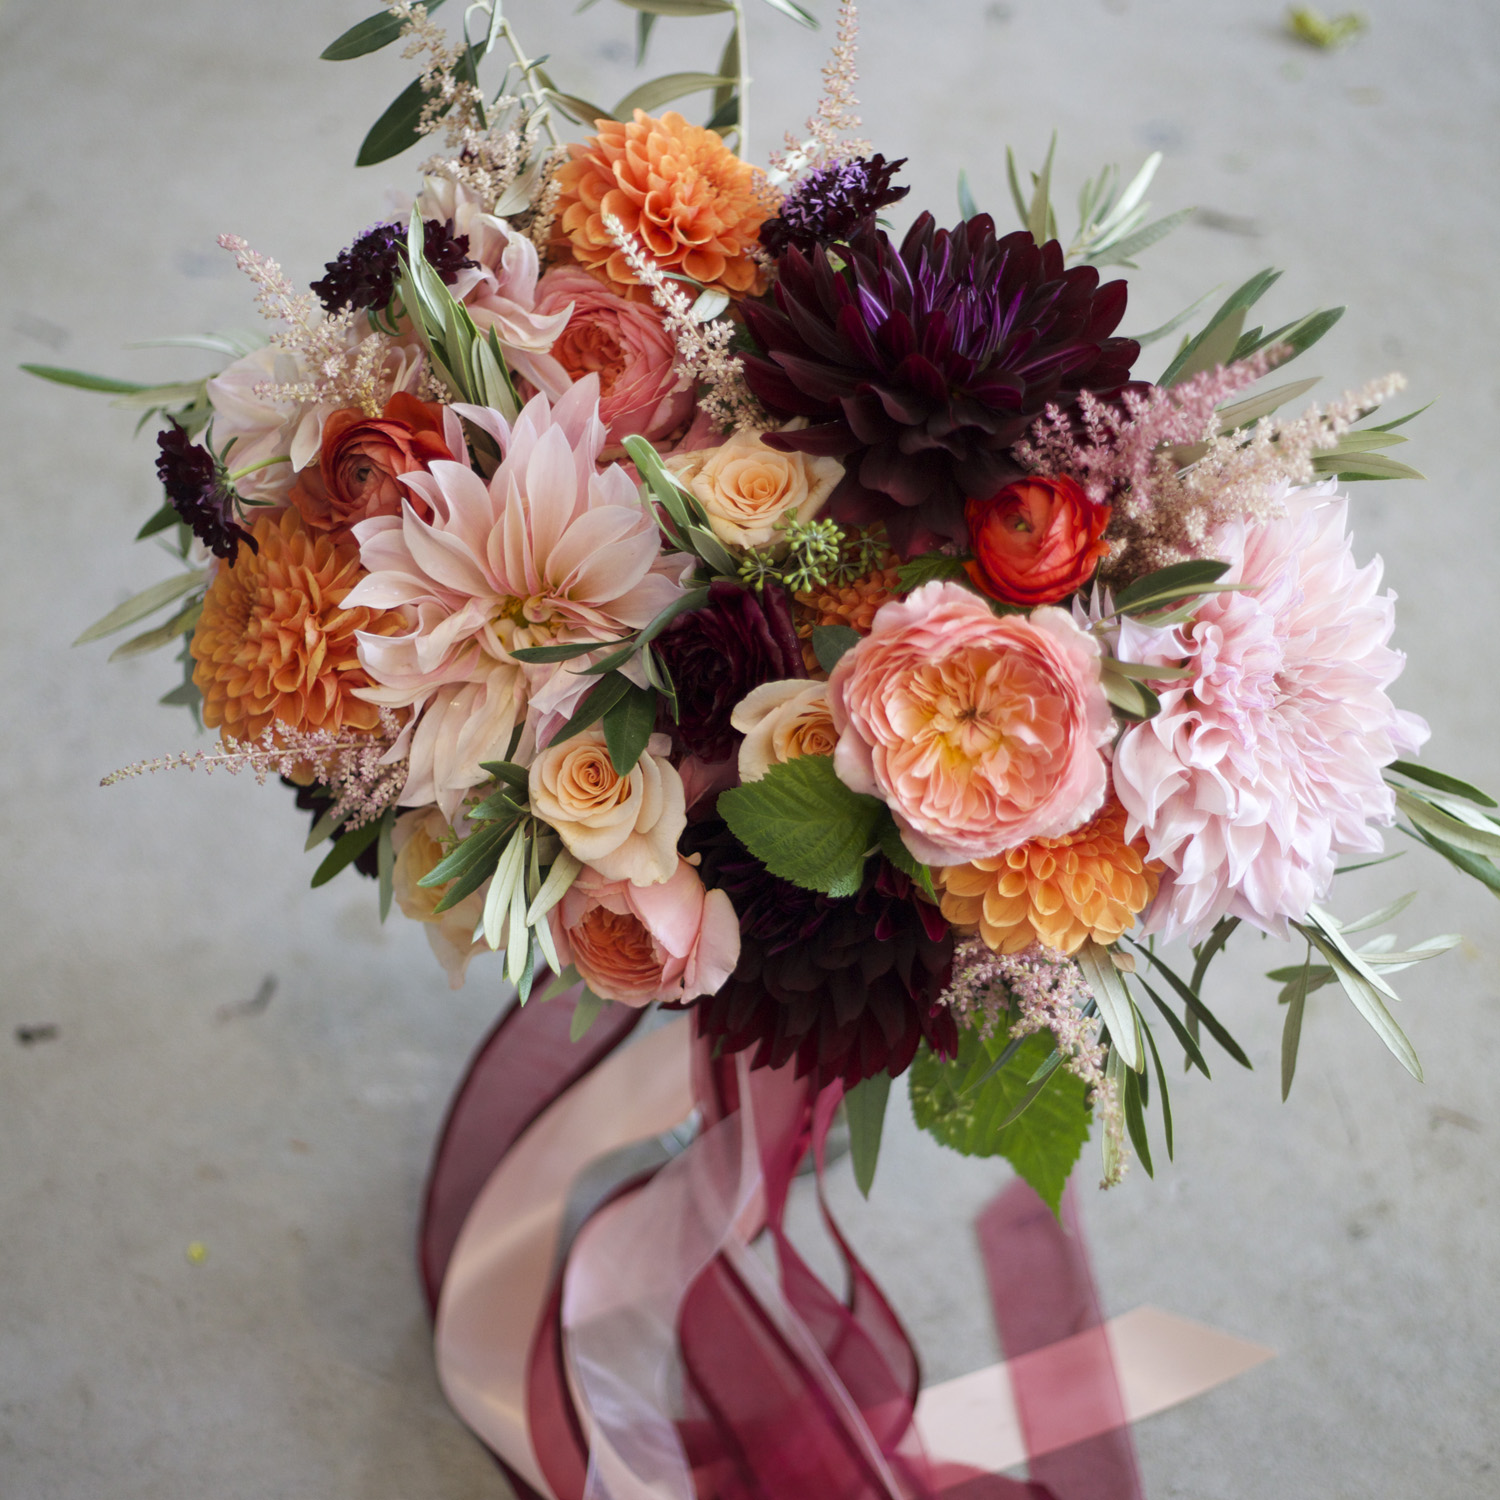 Search Results For Flirty Fleurs The Florist Blog